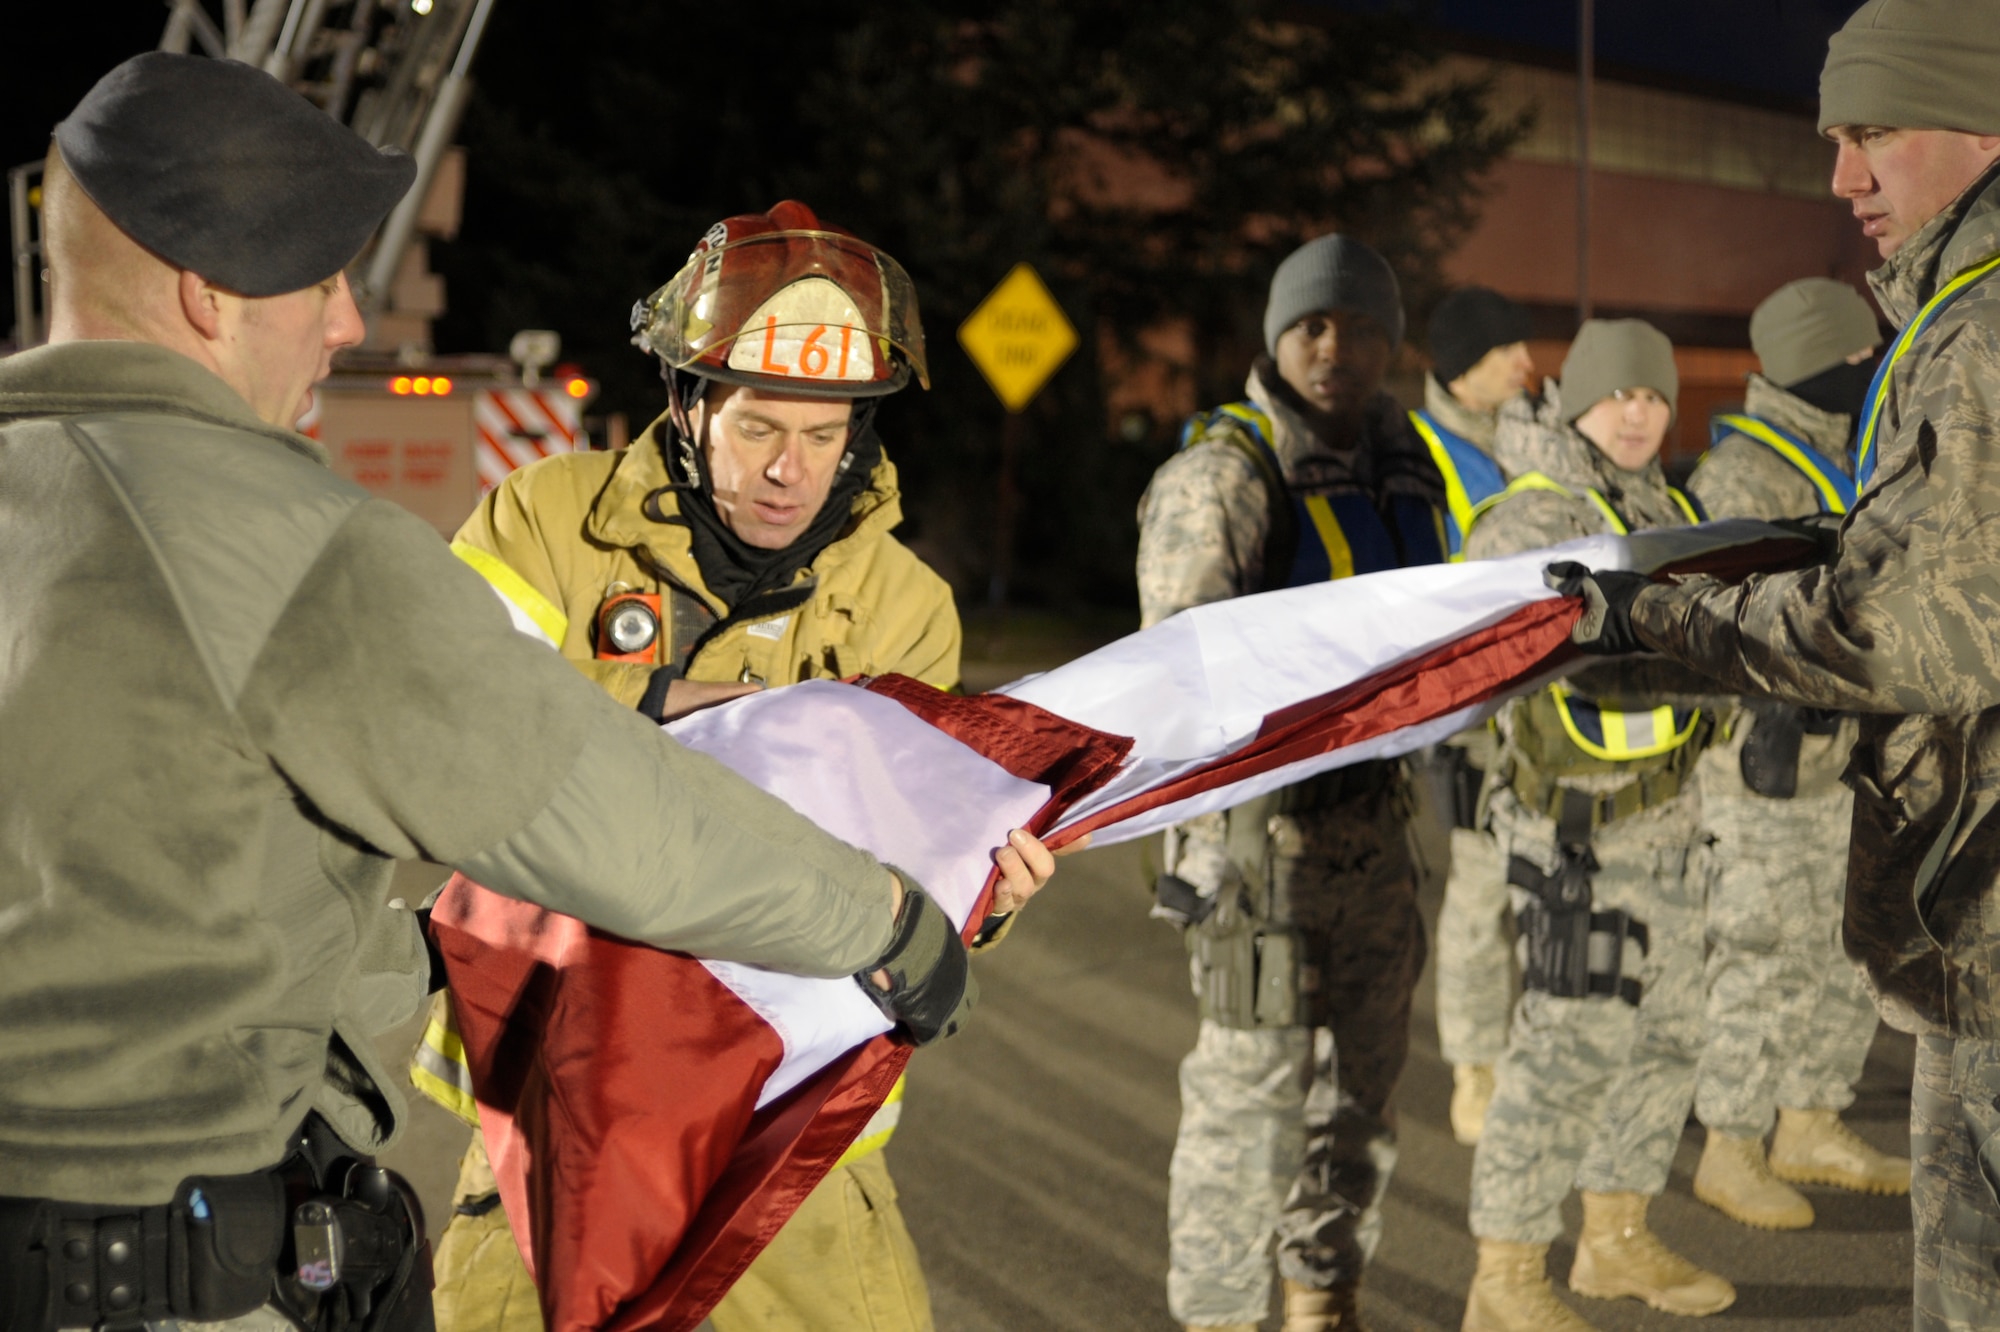 McChord Airmen and Lakewood emergency responders unfold the flag they will hang from fire truck ladders over the McChord north gate where approximately 2,000 emergency services vehicles from throughout the U.S. and Canada are staging their vehicles to depart McChord Dec. 8 in a procession to the Tacoma Dome Memorial Service honoring four fallen Lakewood, Wash., Police Officers. (U.S. Air Force/Abner Guzman)